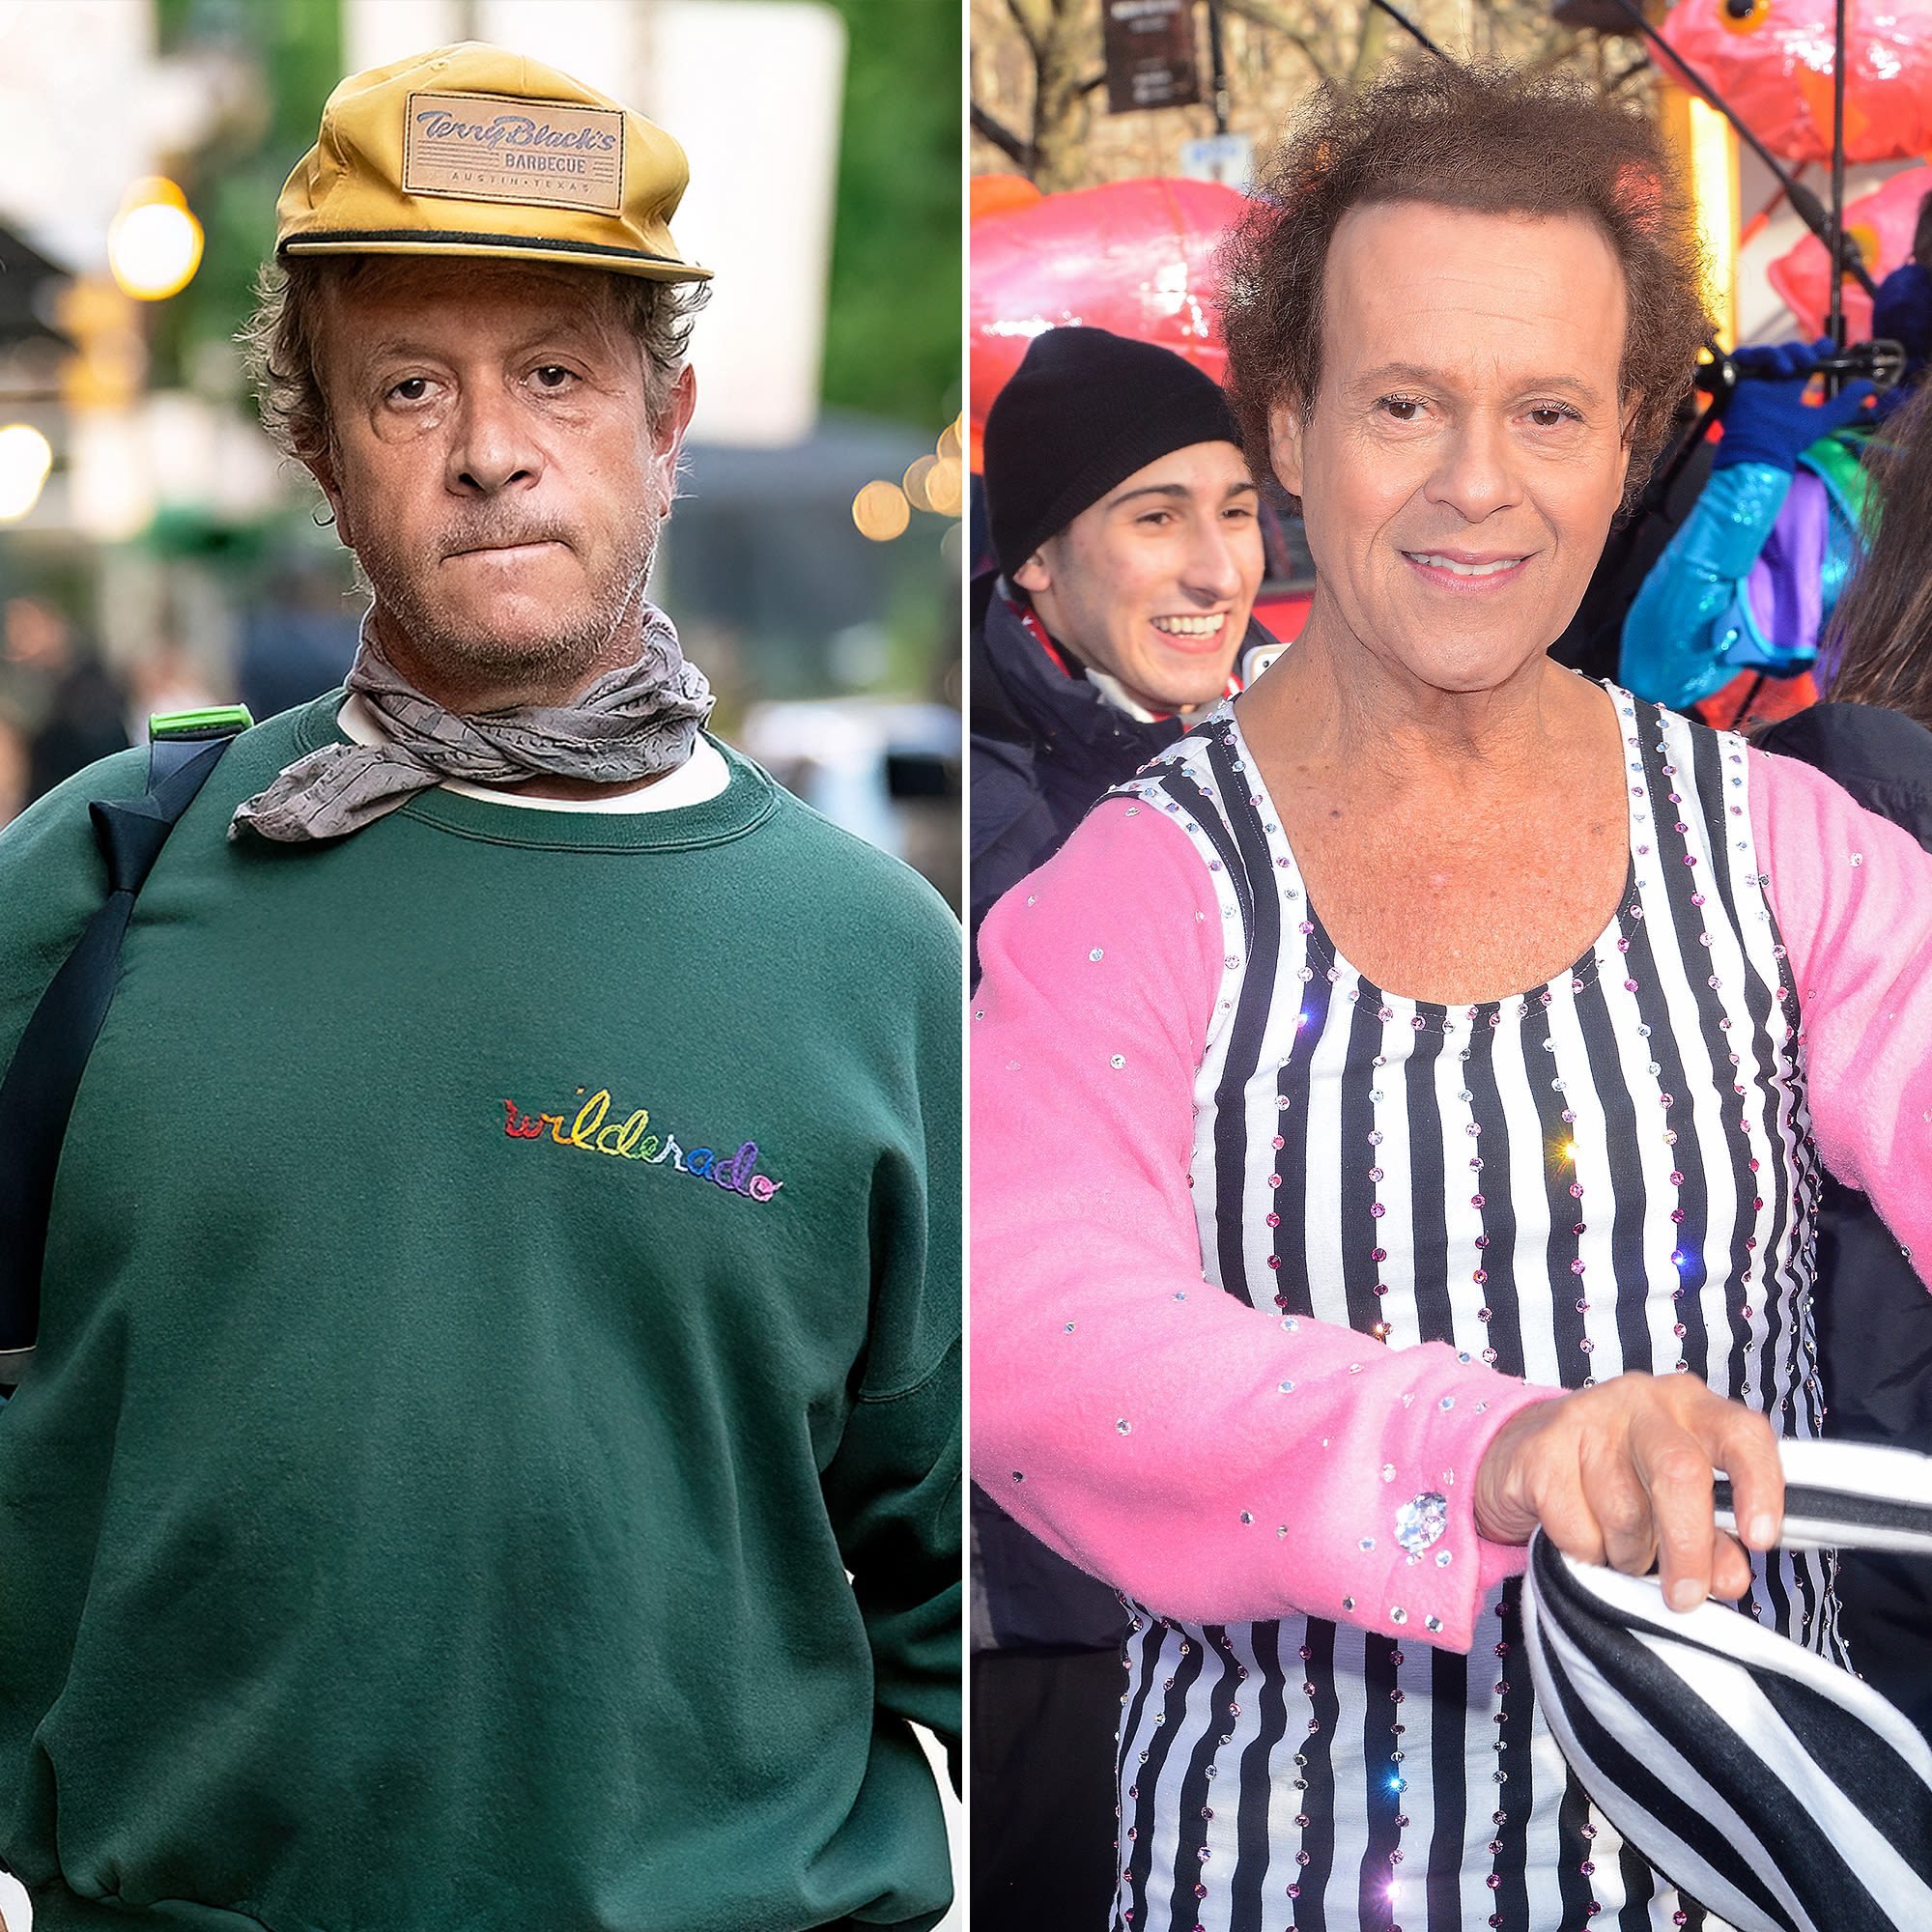 Pauly Shore Reacts to Death of ‘One of a Kind’ Richard Simmons After Biopic Controversy